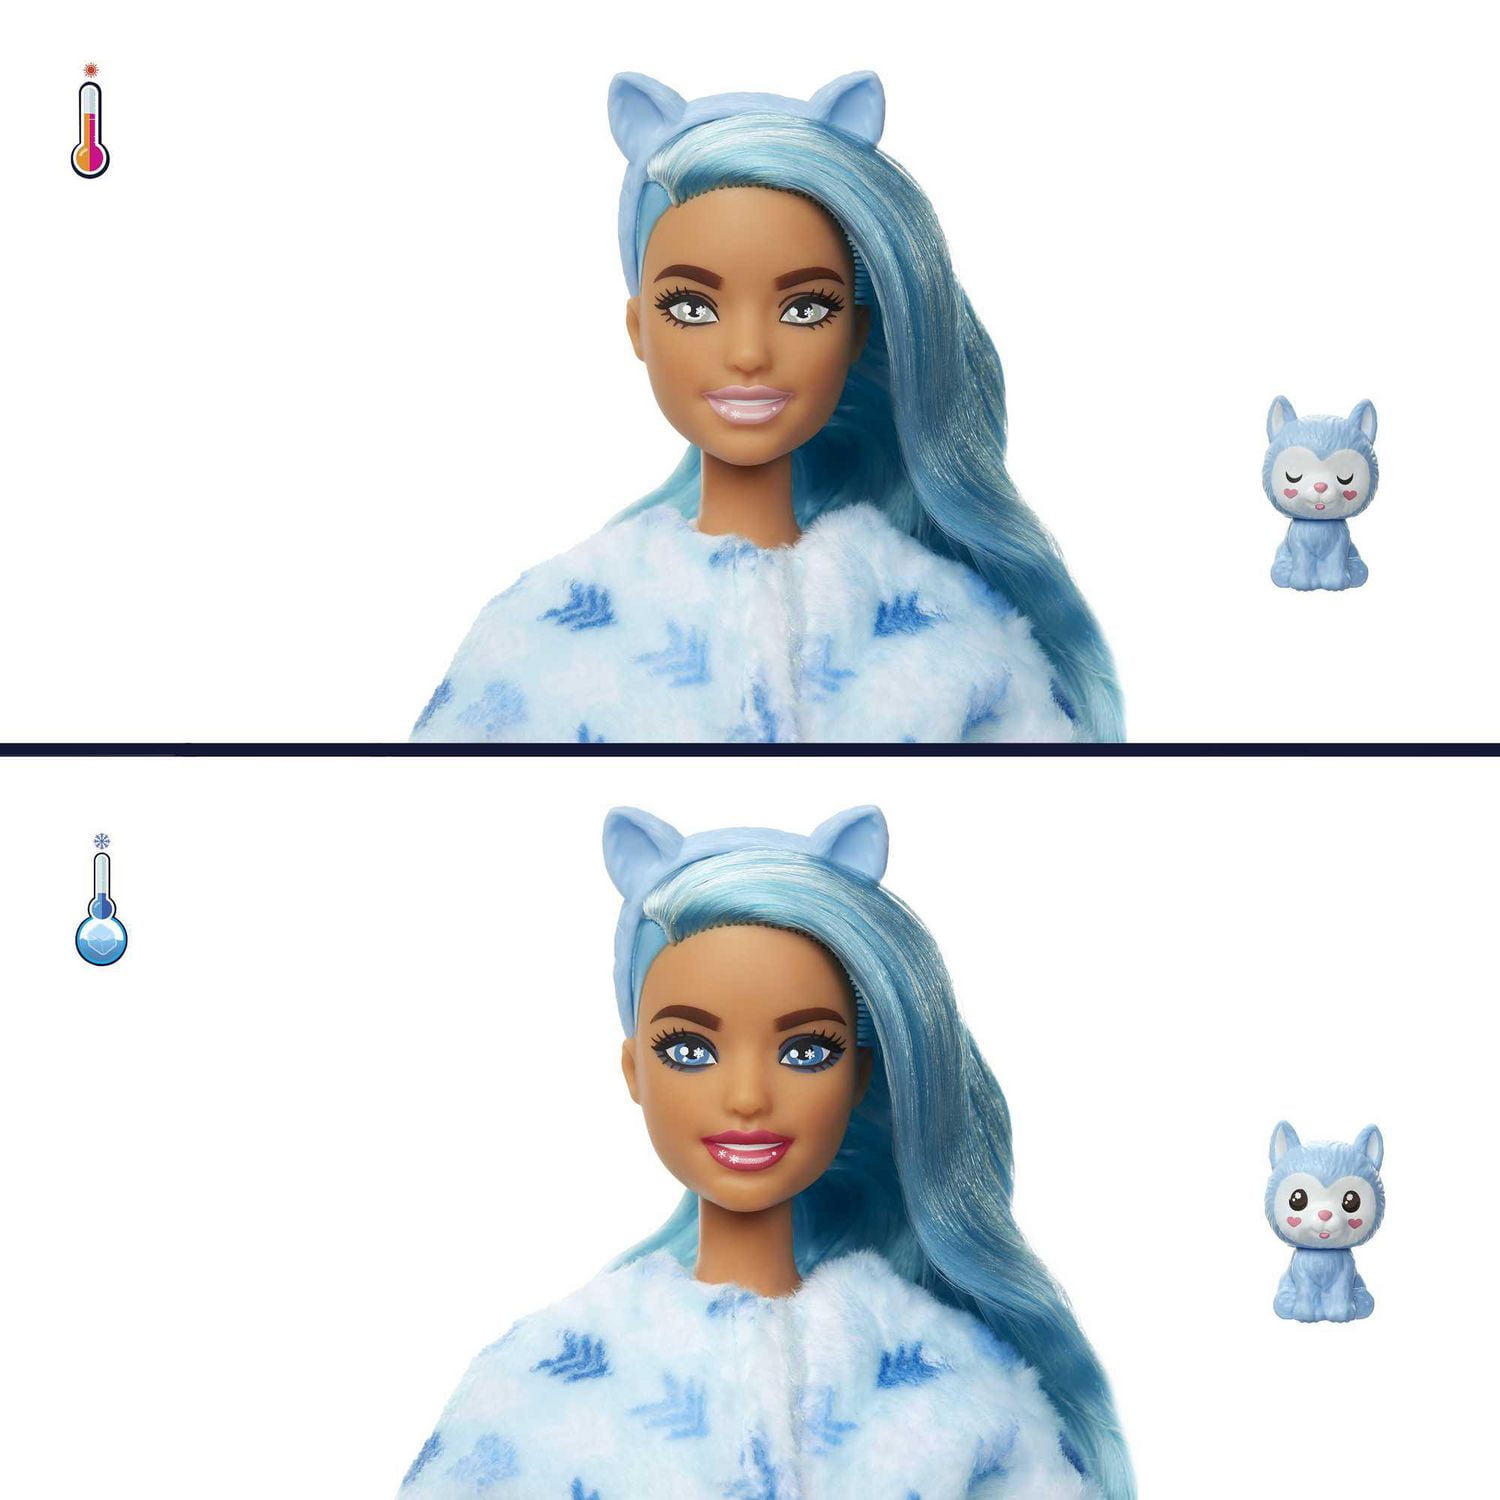 Barbie knows that hydration is key to maintaining your sparkle as